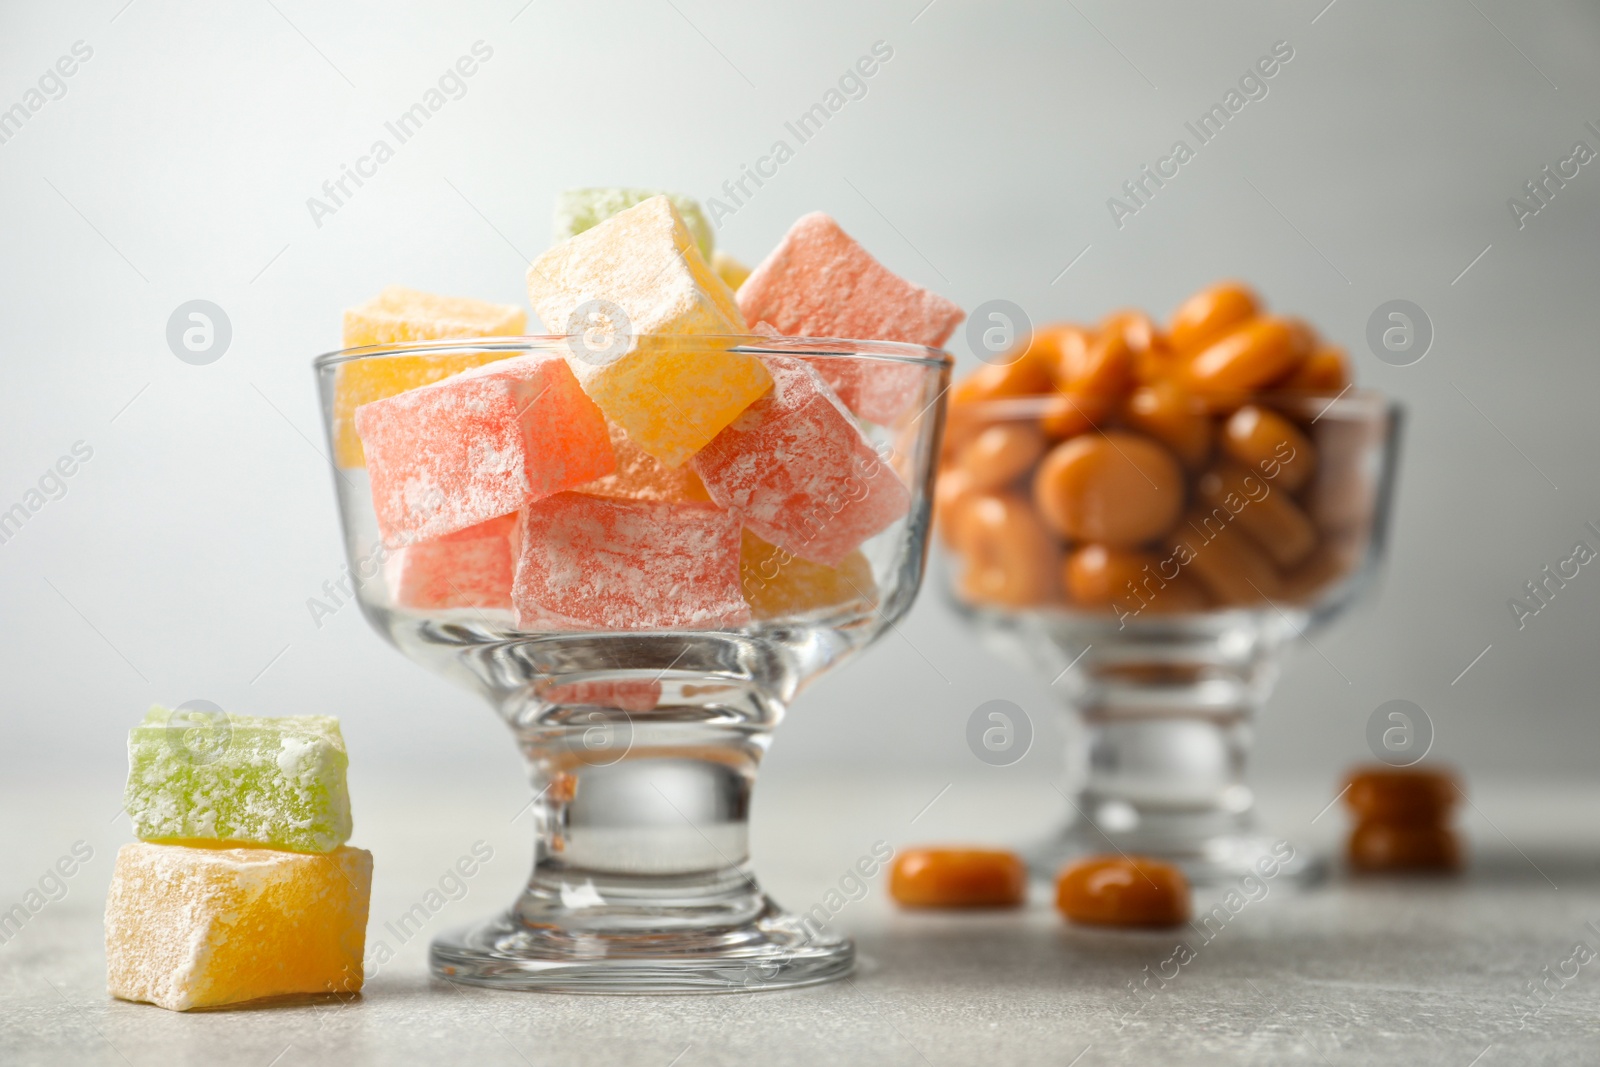 Photo of Dessert bowls filled with tasty sweets on light table